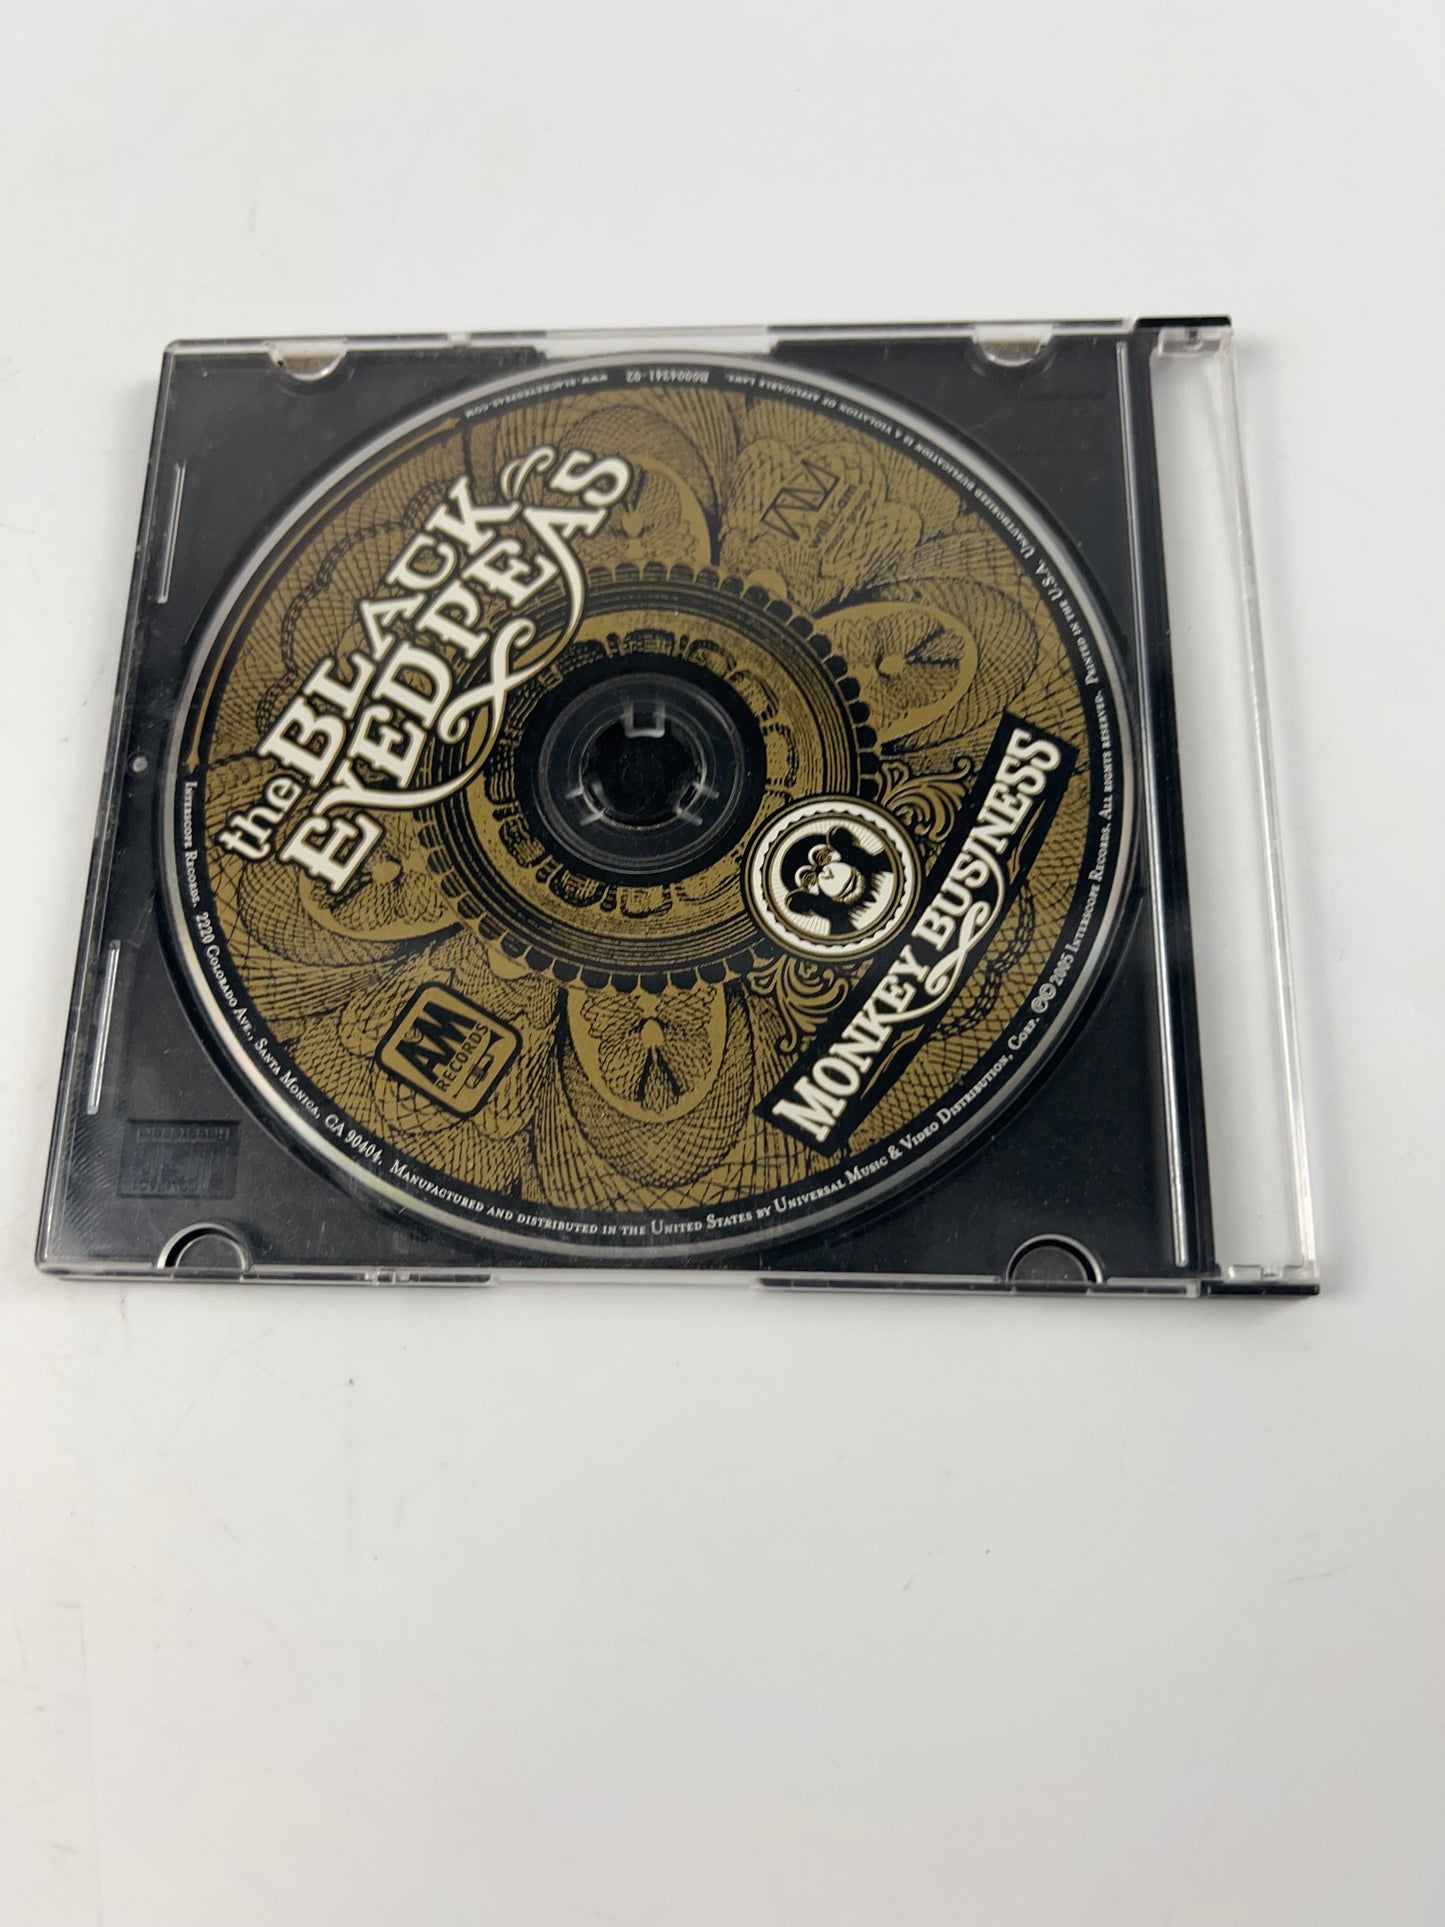 Monkey Business by The Black Eyed Peas (CD, 2005)